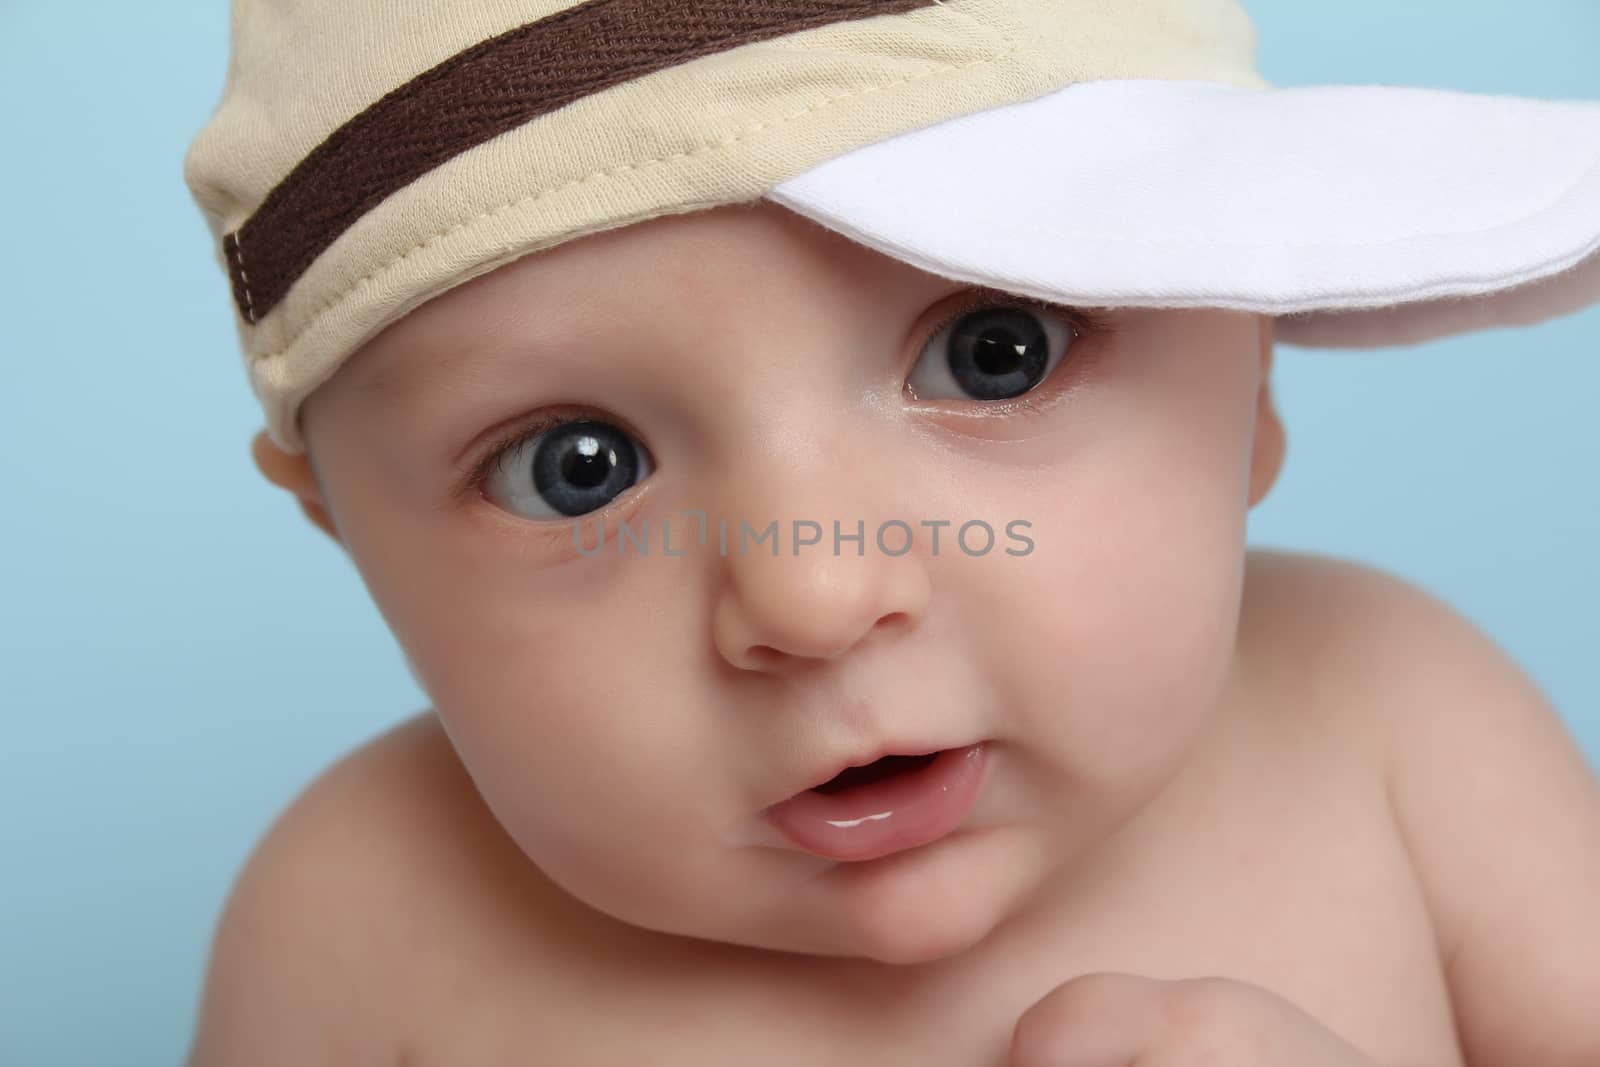 Baby boy wearing a hat against blue background